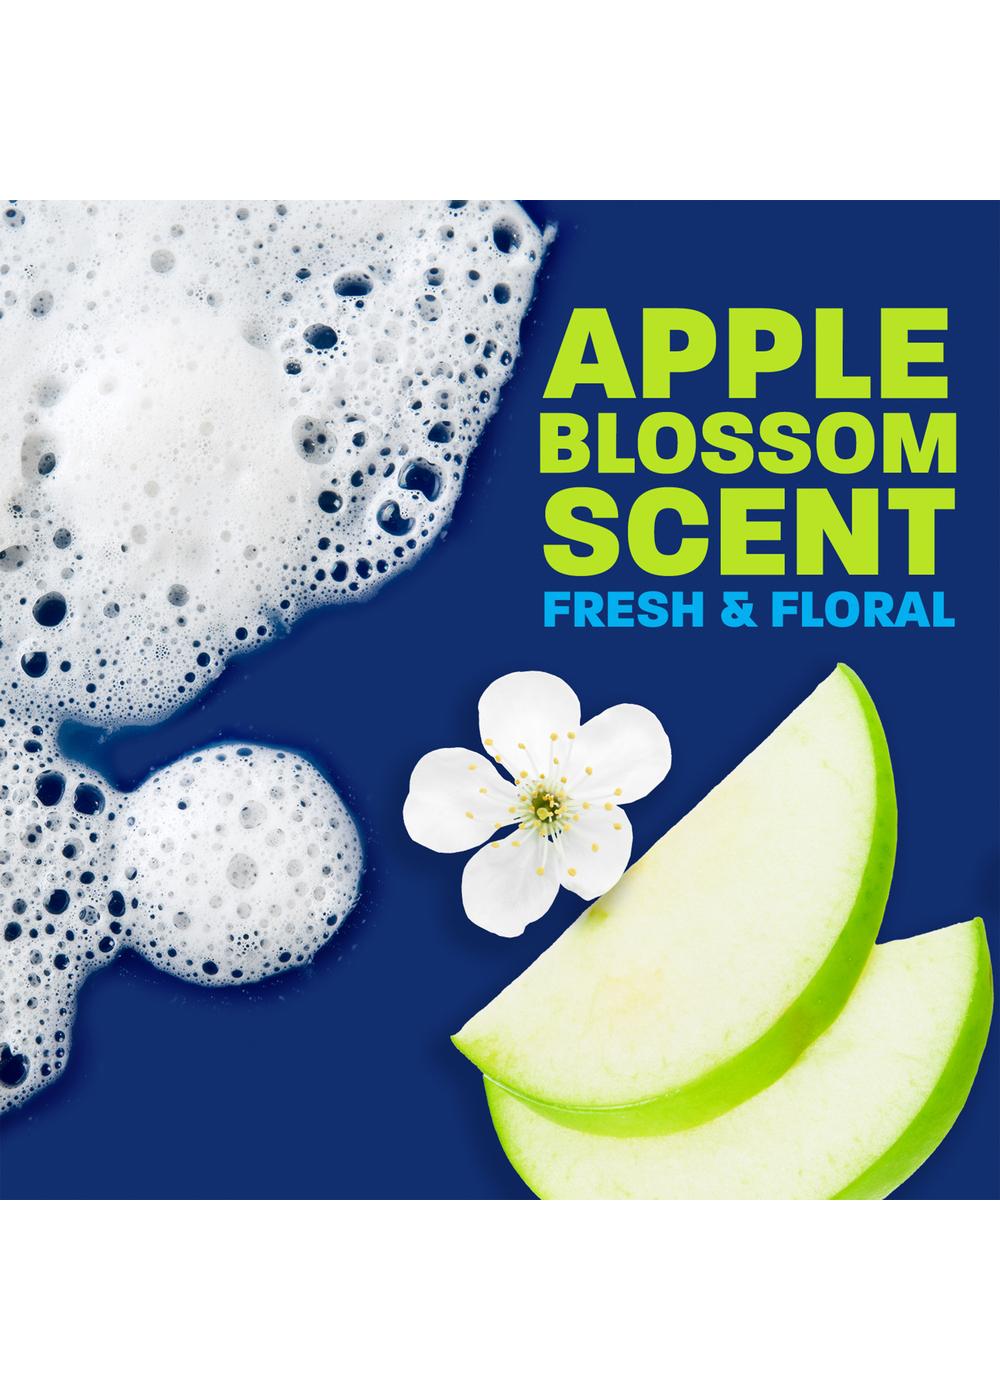 Dawn Ultra Antibacterial Hand Soap - Apple Blossom; image 2 of 8